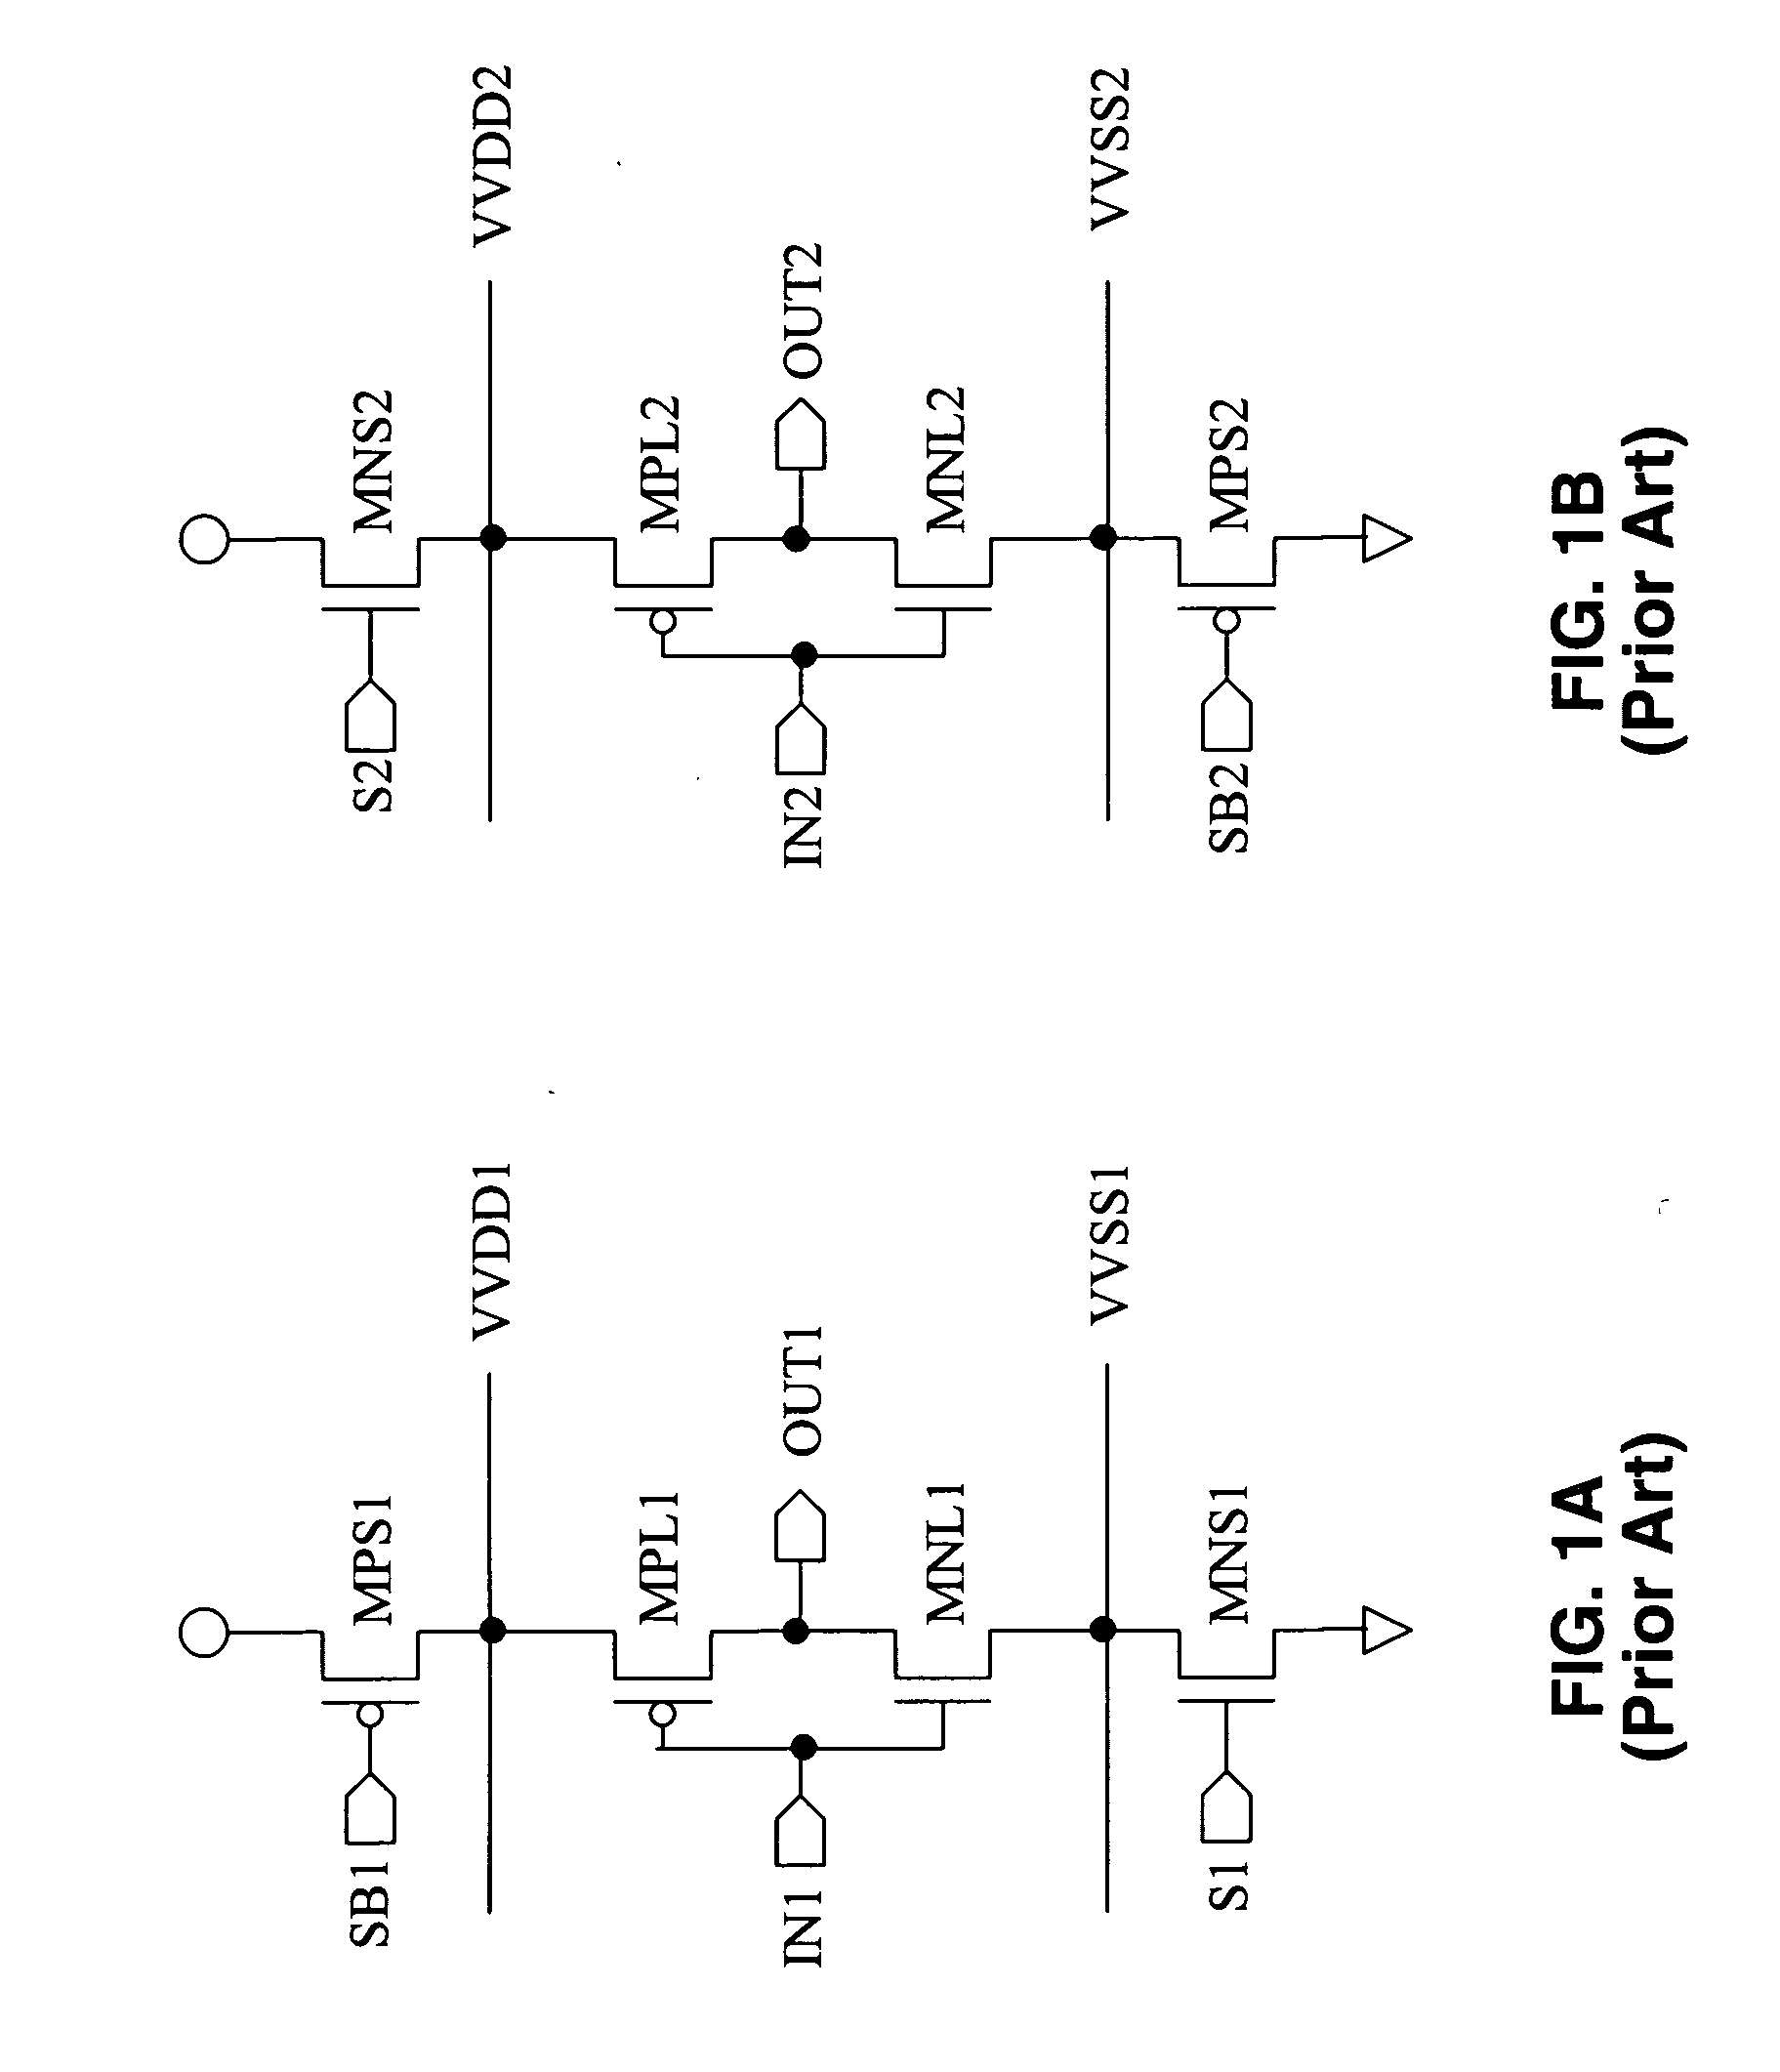 Source transistor configurations and control methods